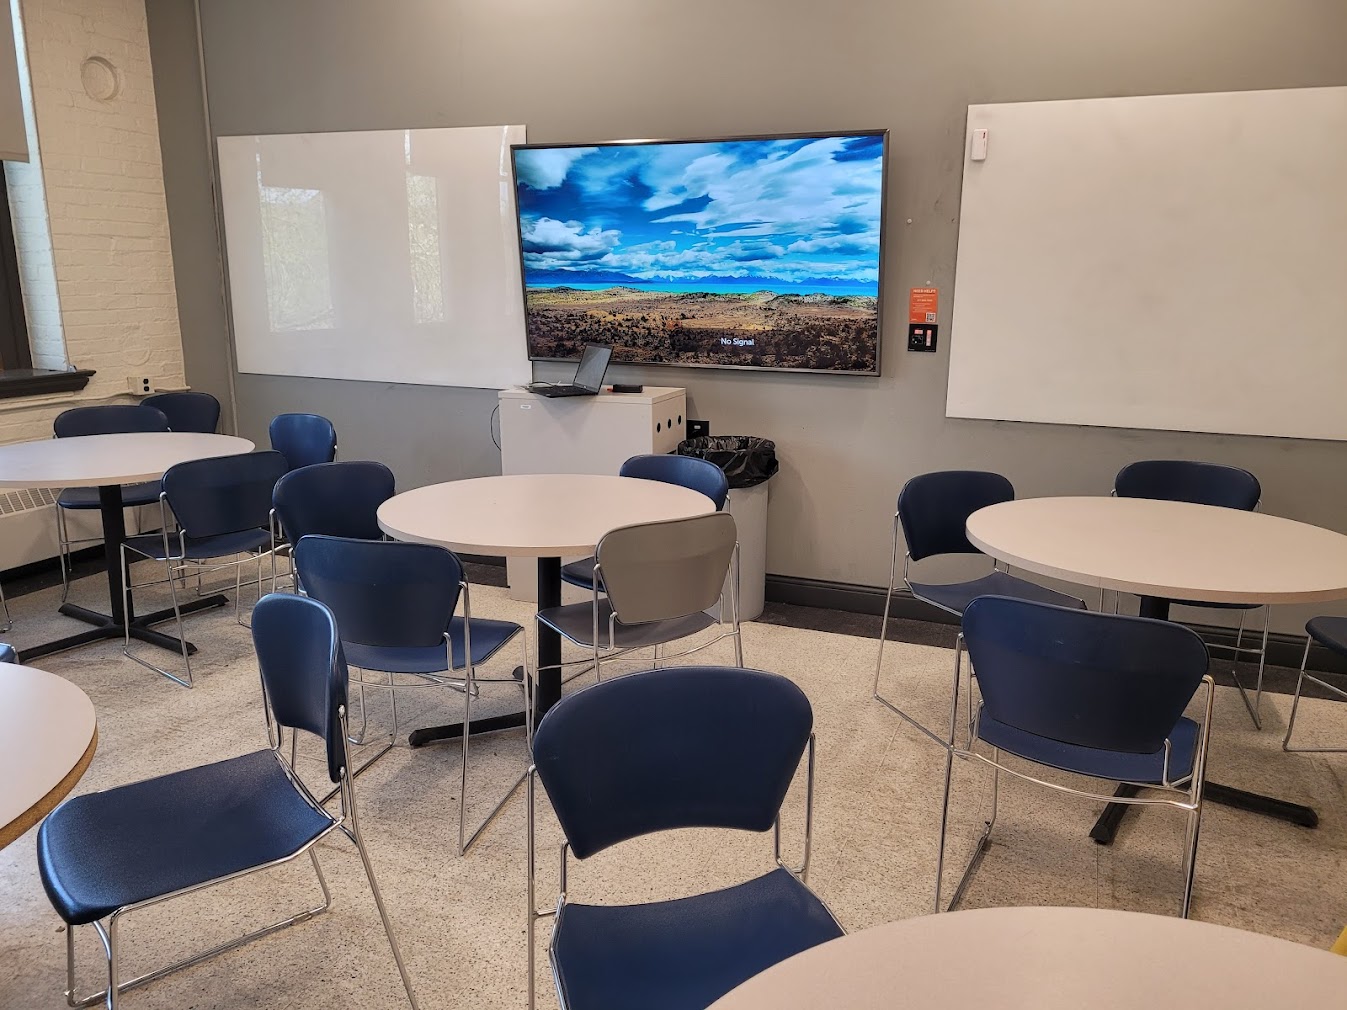 This is a view of the room with student desks, LCD monitor, and white boards.